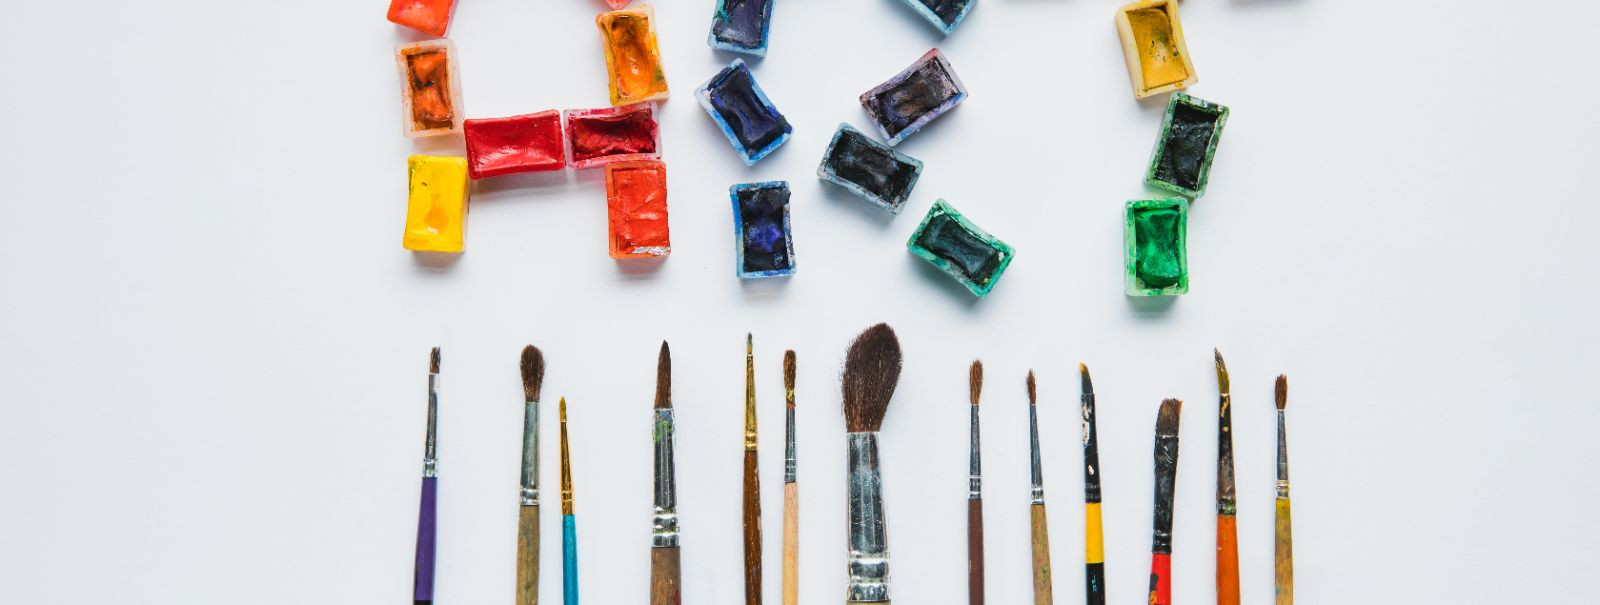 Before diving into the vast sea of art supplies, it's crucial to evaluate your current skill level. Beginners might opt for basic, more affordable materials to 